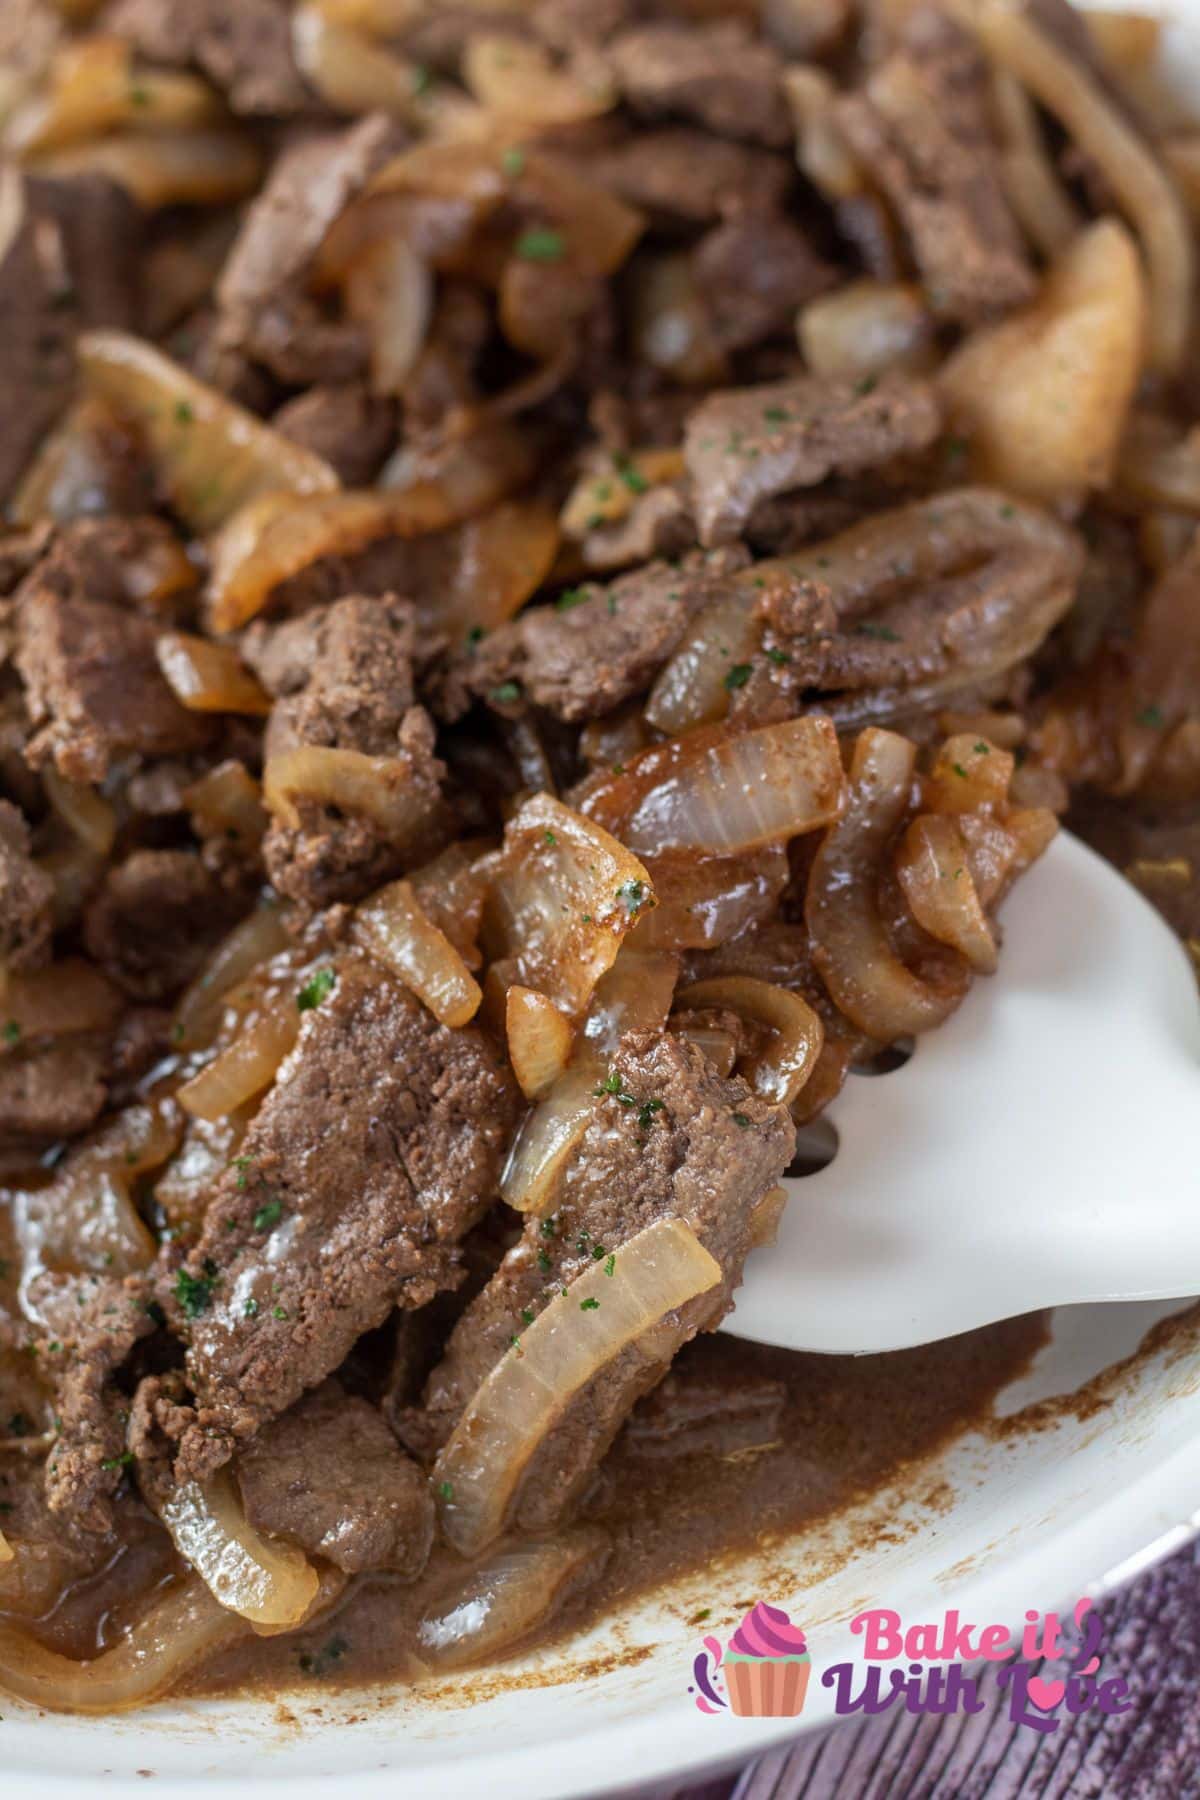 Tall image of beef liver and onions in a frying pan.